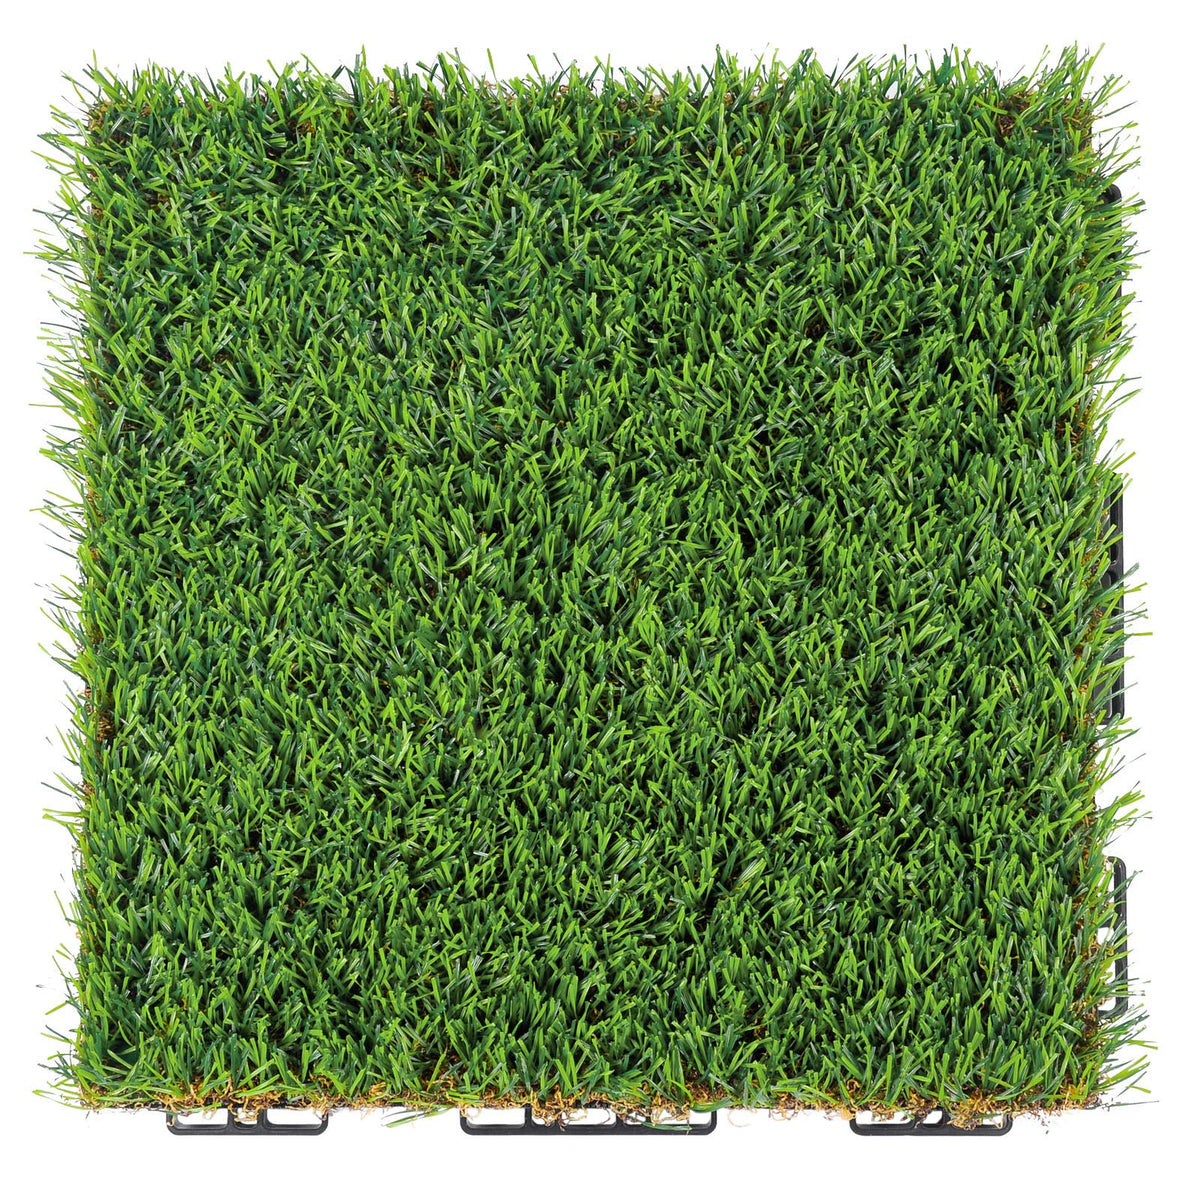 Artificial Grass Interlocking Tiles for Dog Rugs Size 1'X1' 1'' Piles Height 1 Pack